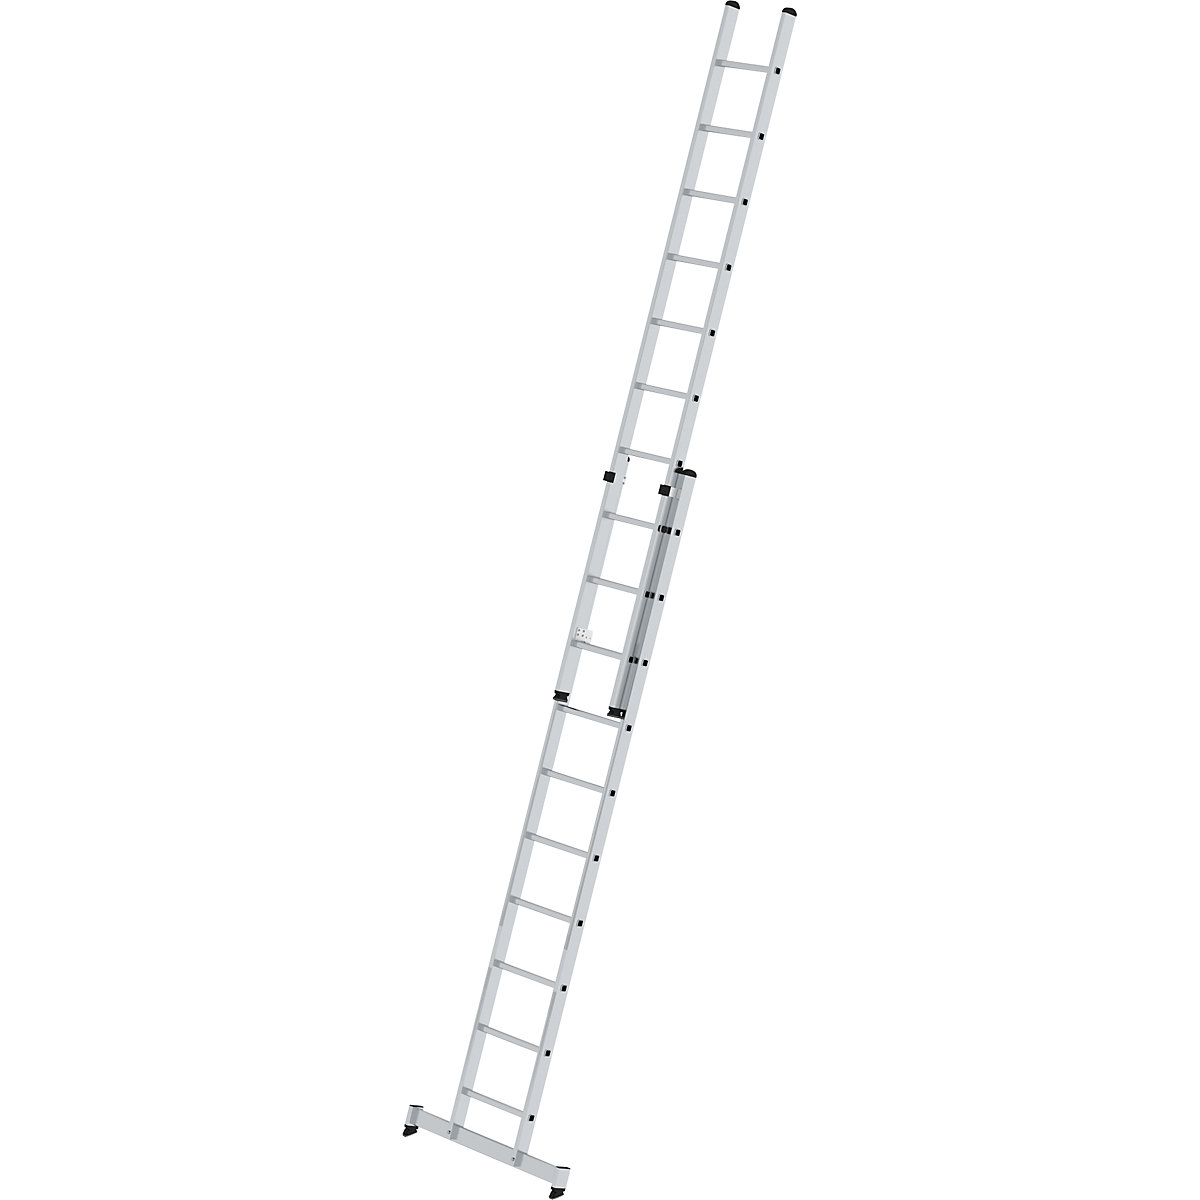 Height adjustable lean-to ladder – MUNK, extension ladder, 2-part, 2 x 10 rungs, with nivello® support-10